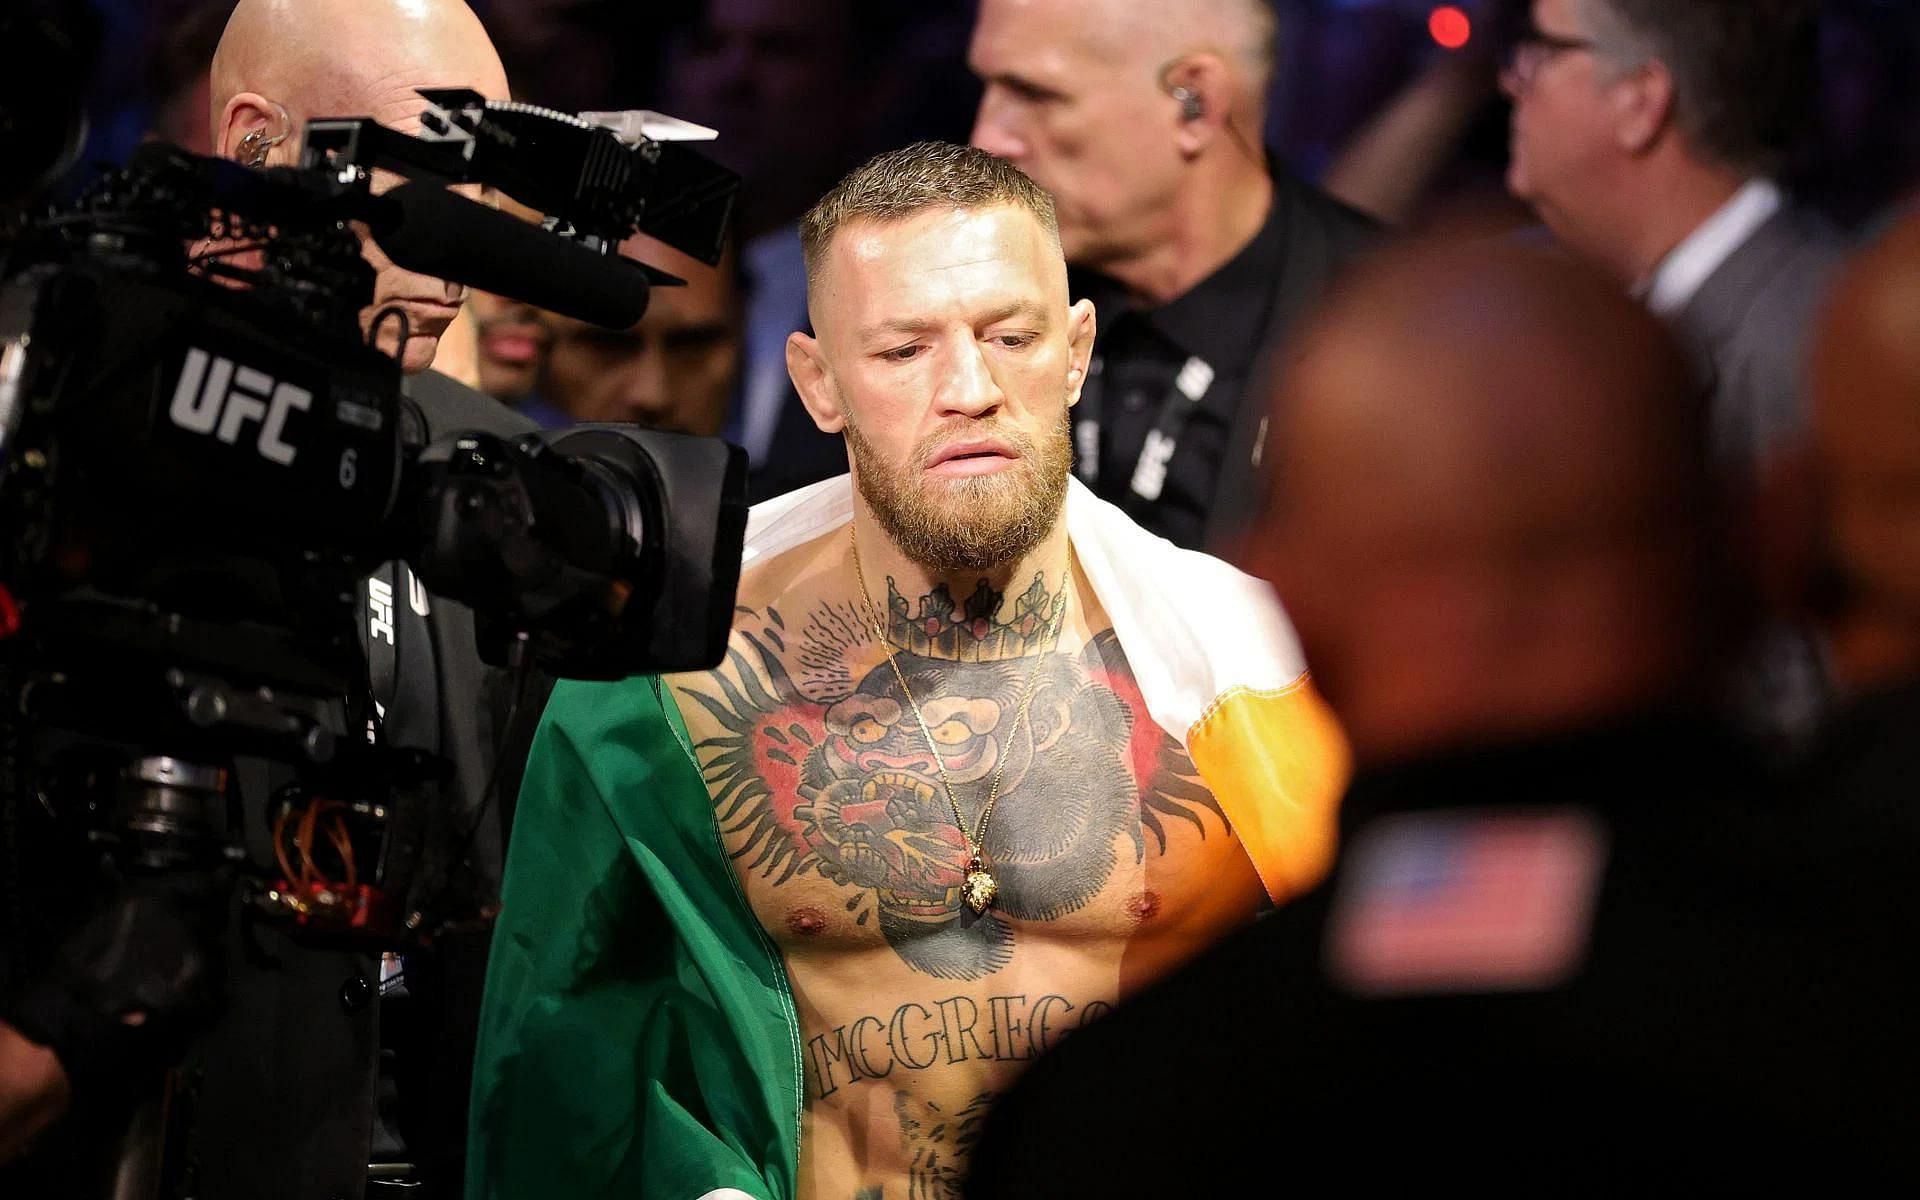 Conor McGregor hailed as the most hated UFC fighter on social media